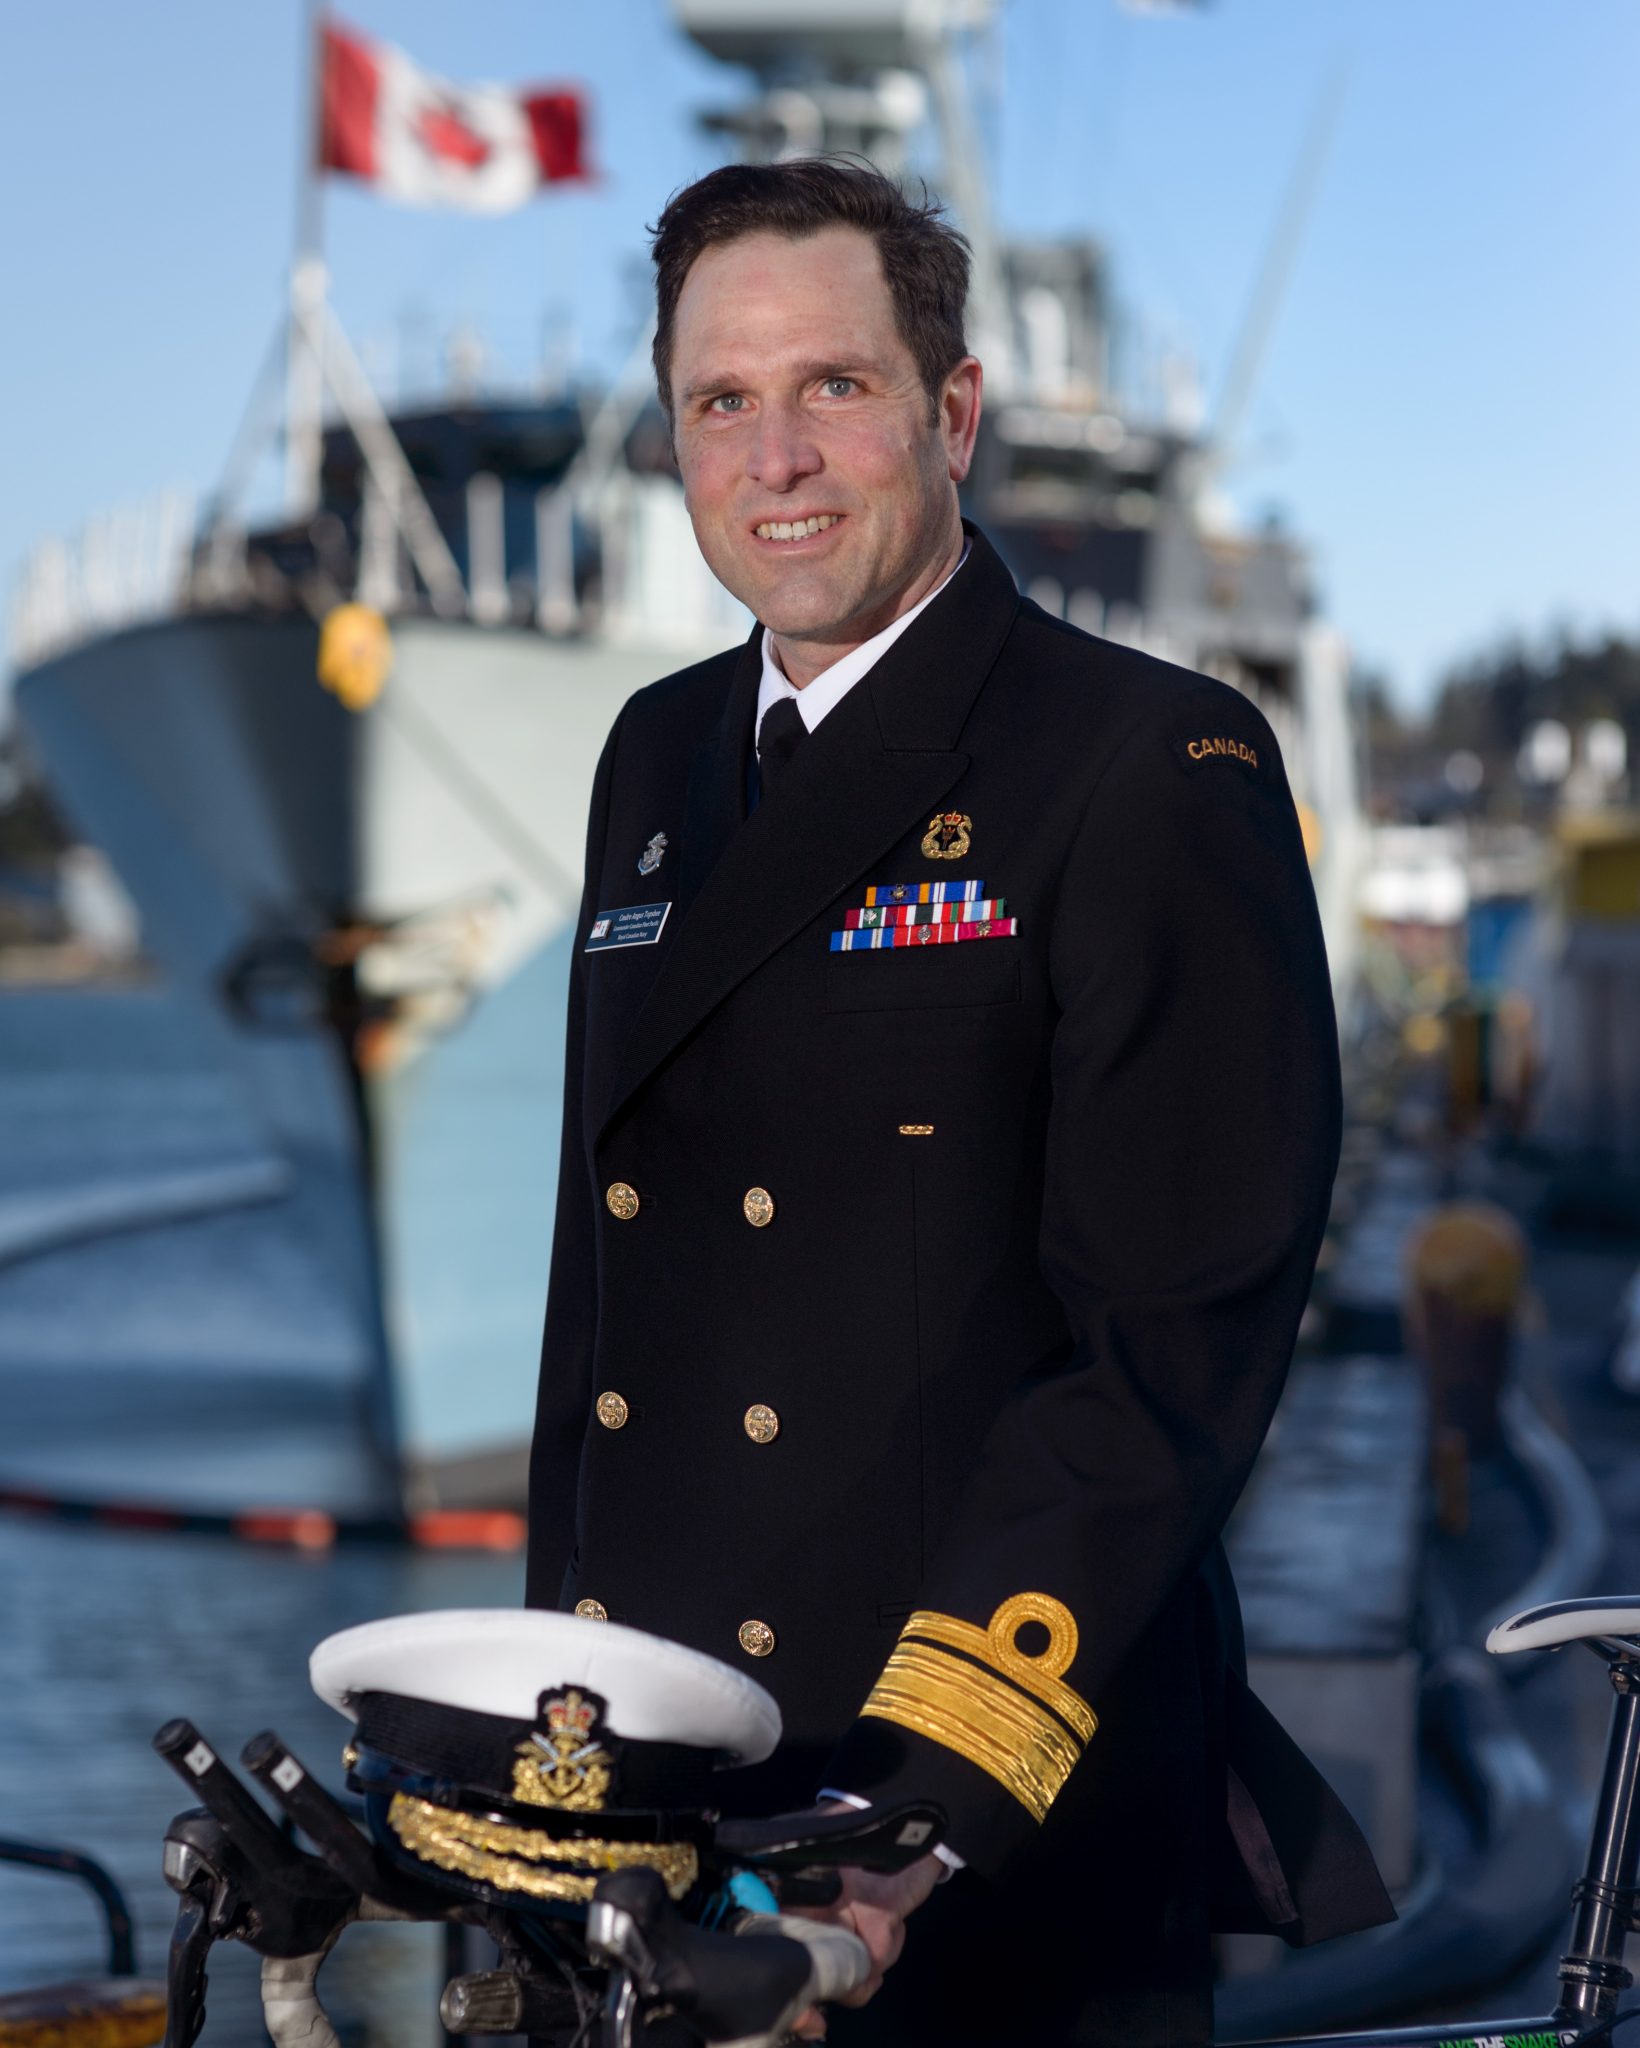 New Canadian service chiefs | The Australian Naval Institute